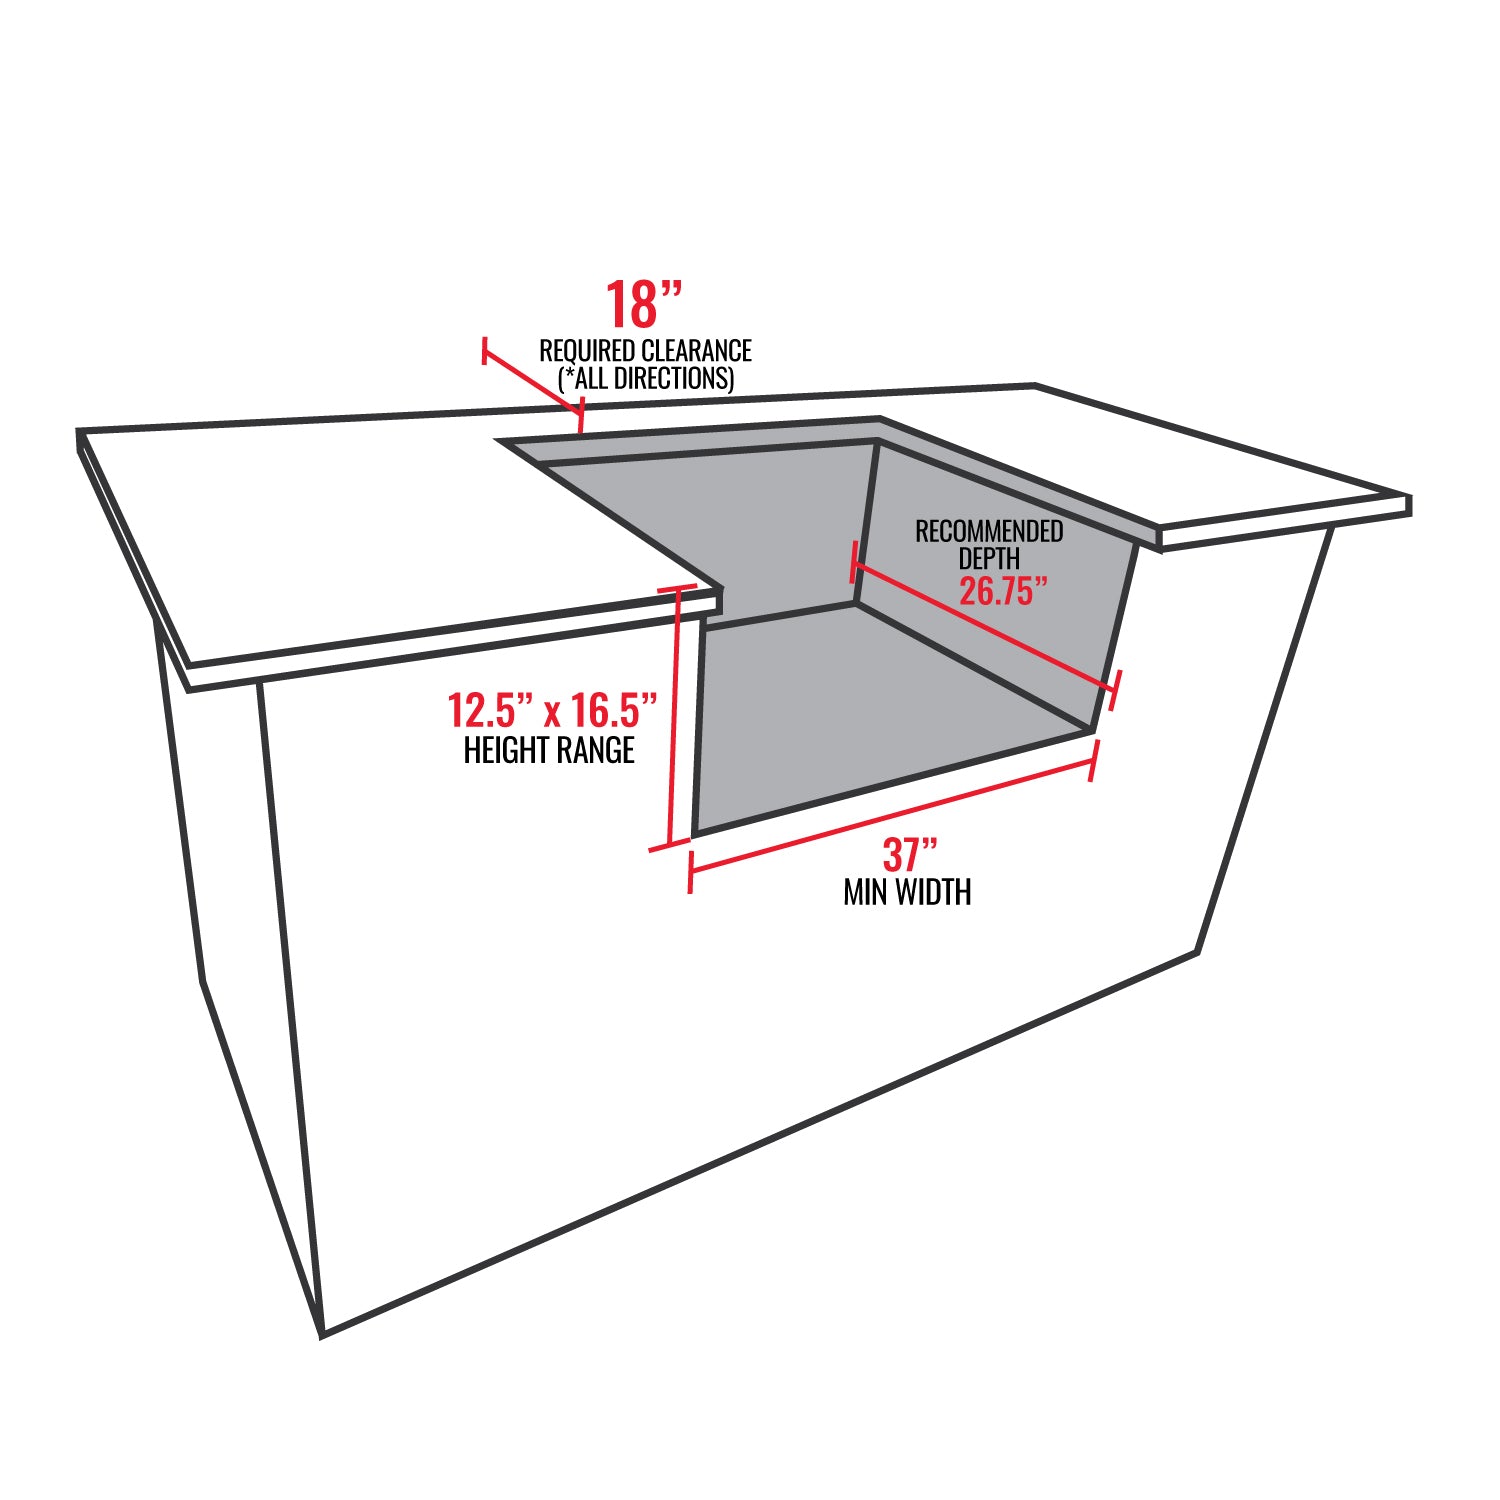 Cartoon picture of the E-Series Built-In 1300 showing that the built-in height range is 12.5" x 16.5", the min width is 37", the recommended depth is 26.75, and the required clearance is 18".